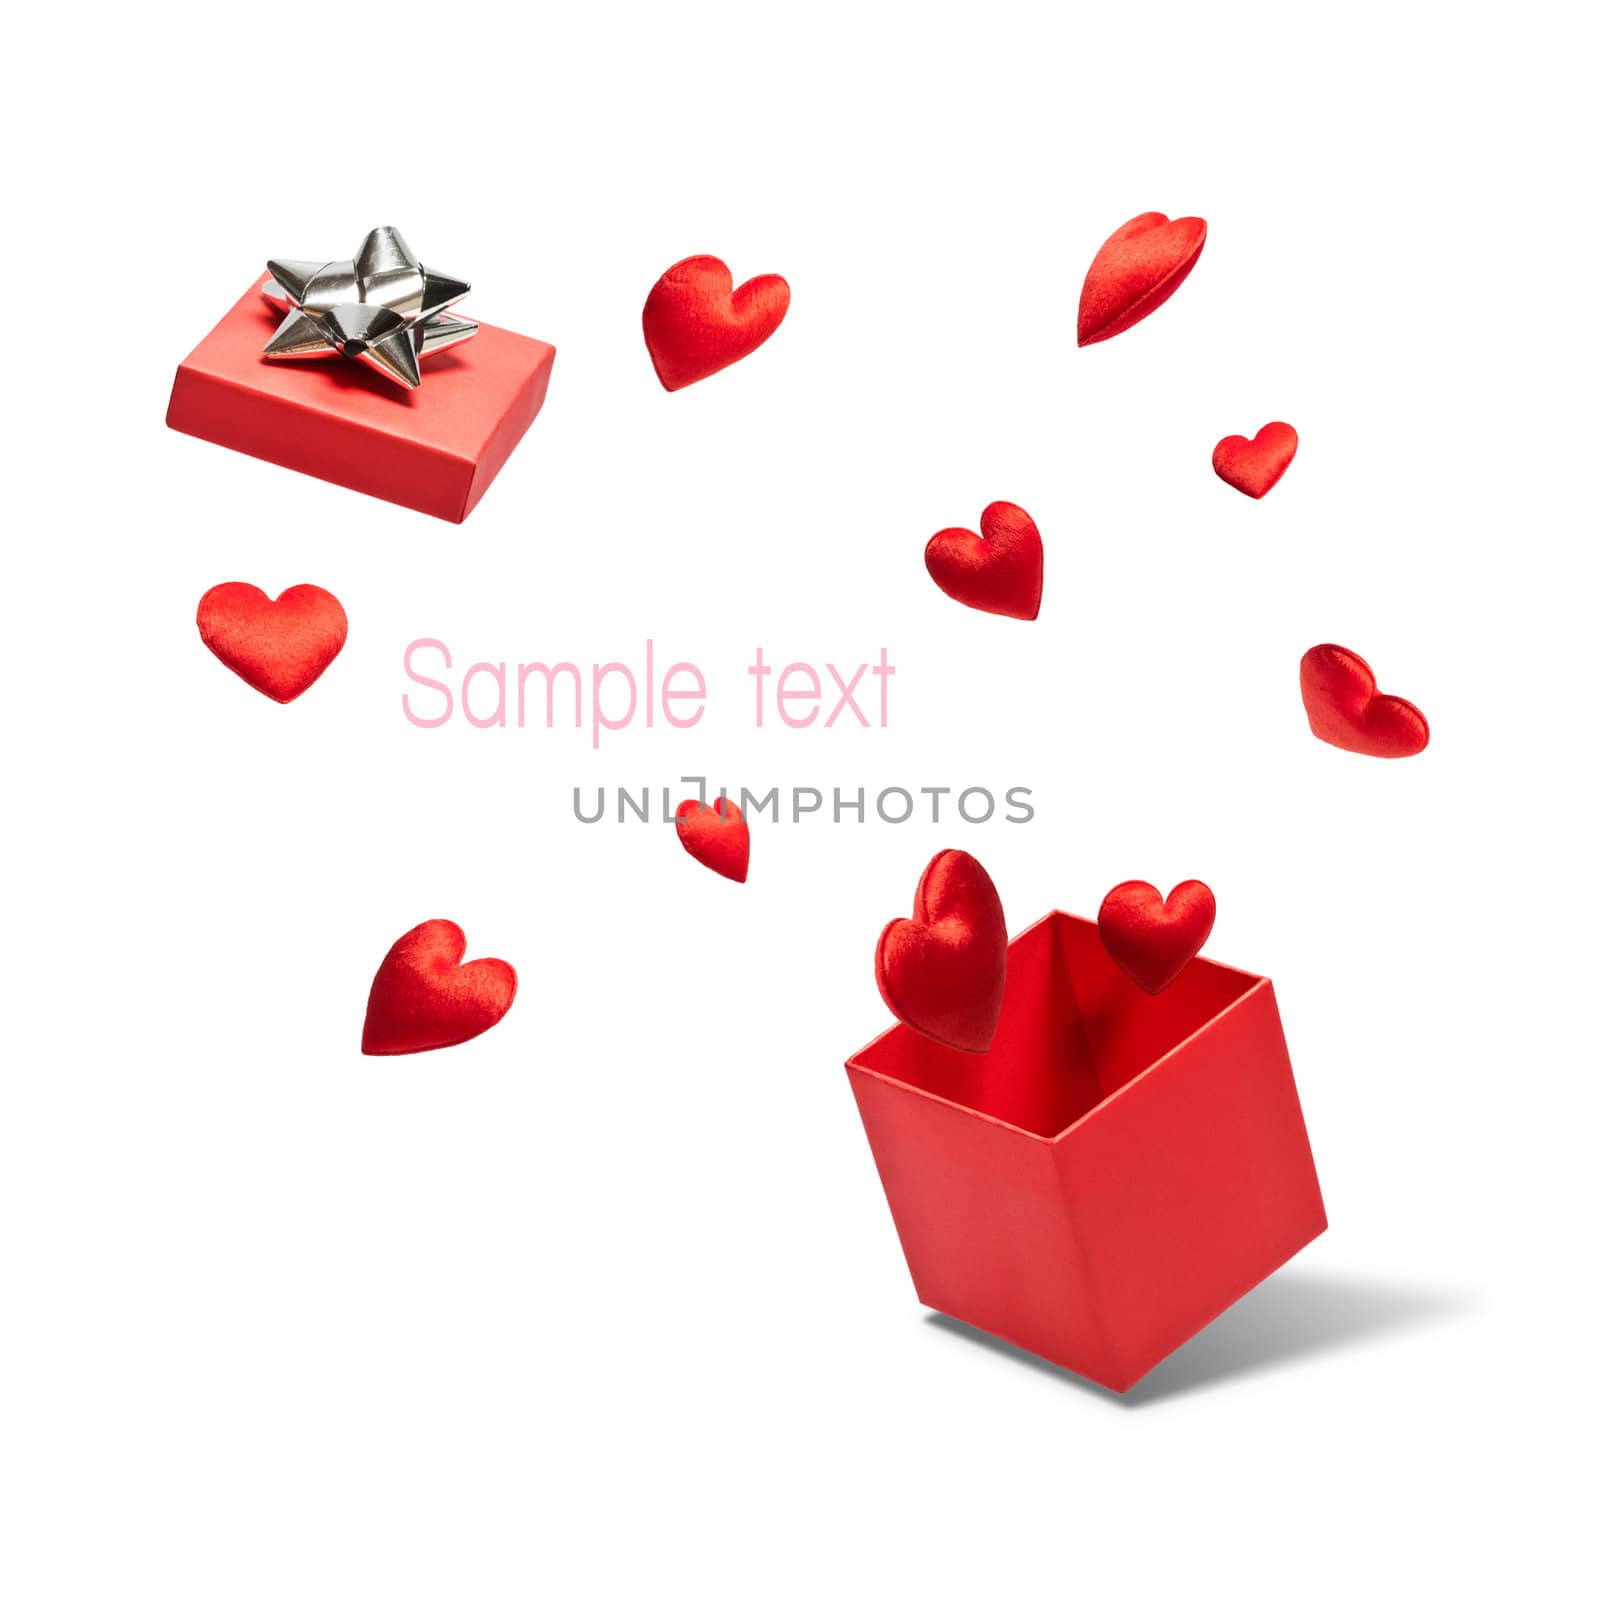 Opened gift box with flying hearts over white background
